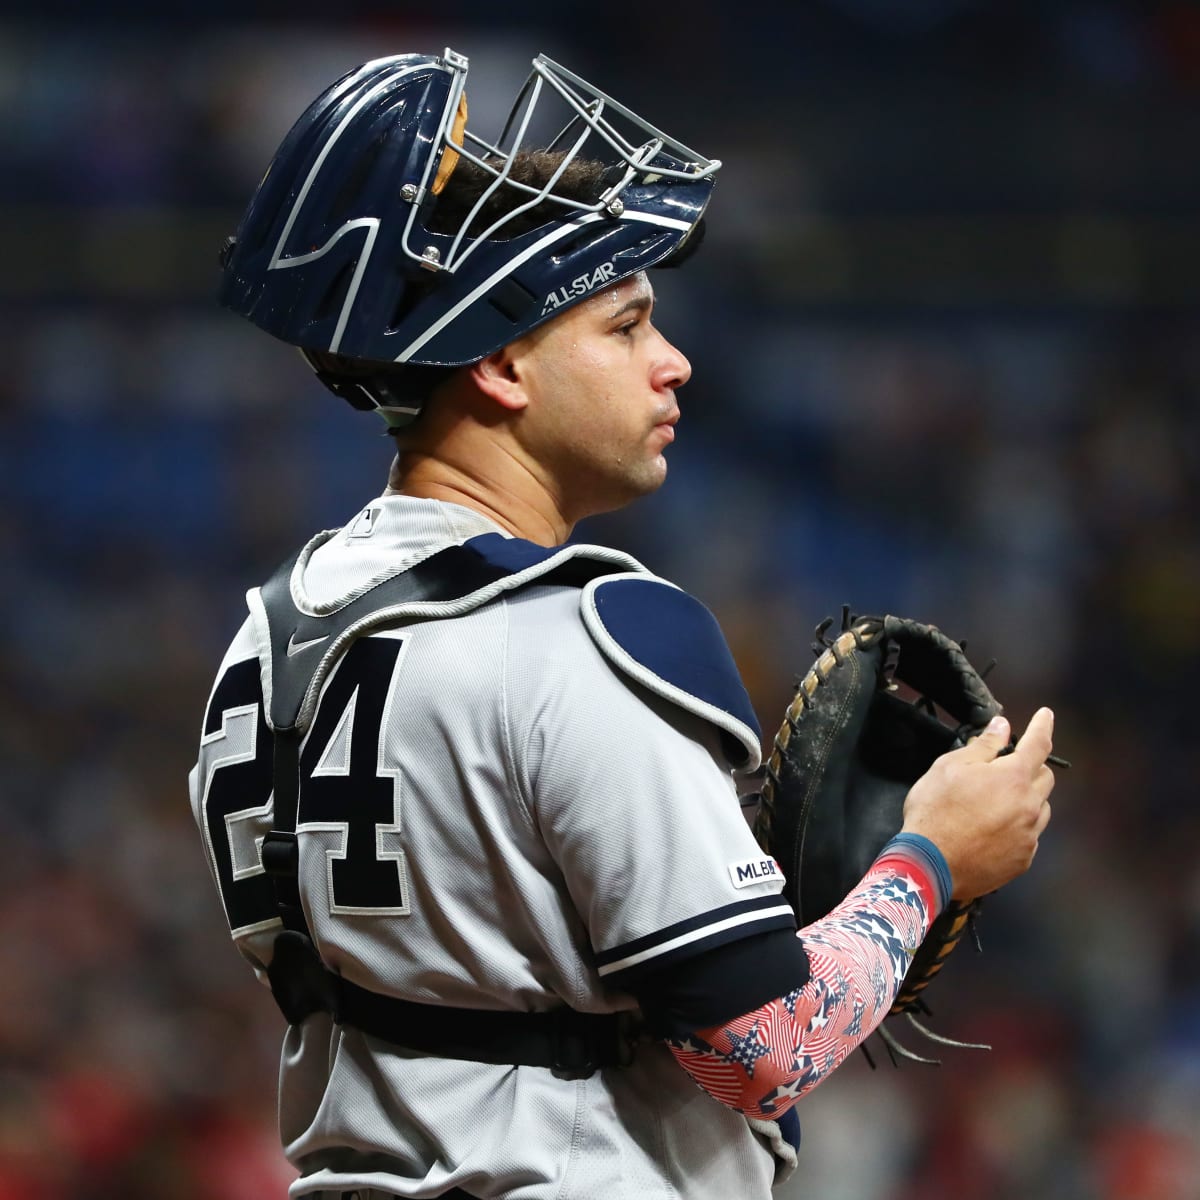 Has Gary Sanchez Played Enough to Win Rookie of the Year? - WSJ